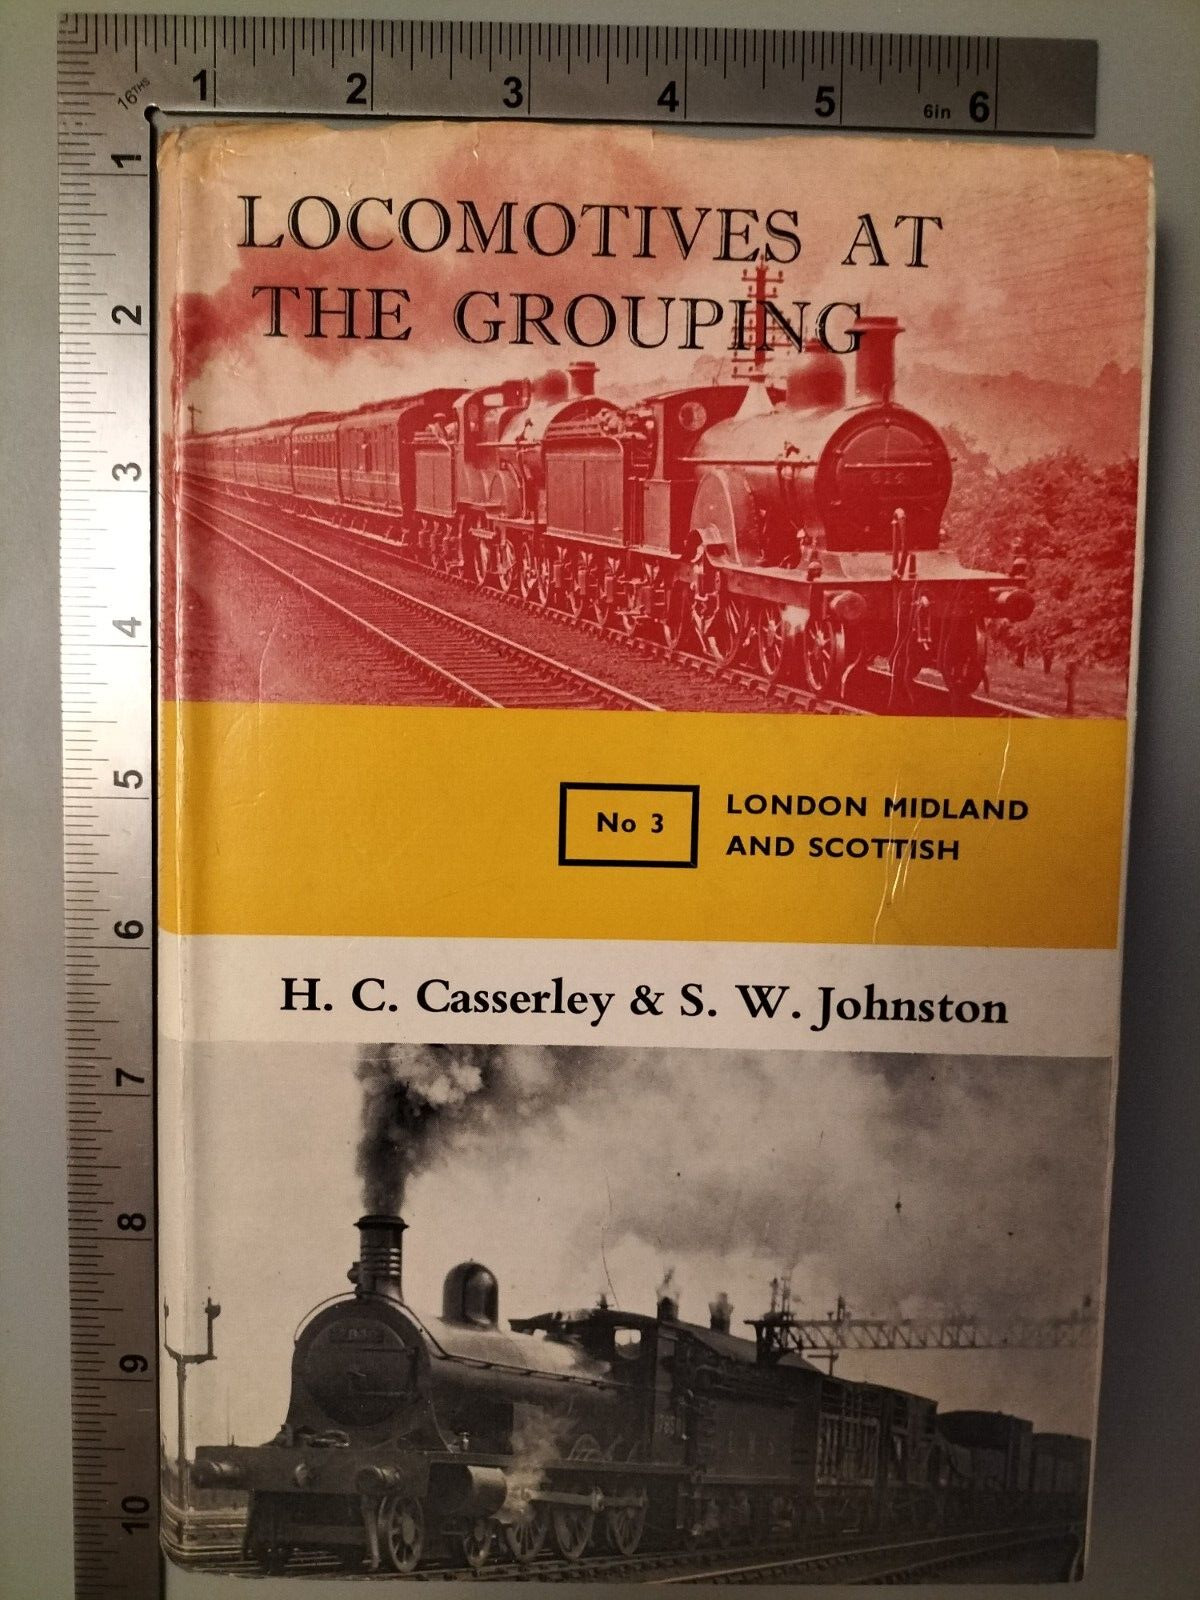 Locomotives At The Grouping No.3  H C Casserley And S W Johnston 1966